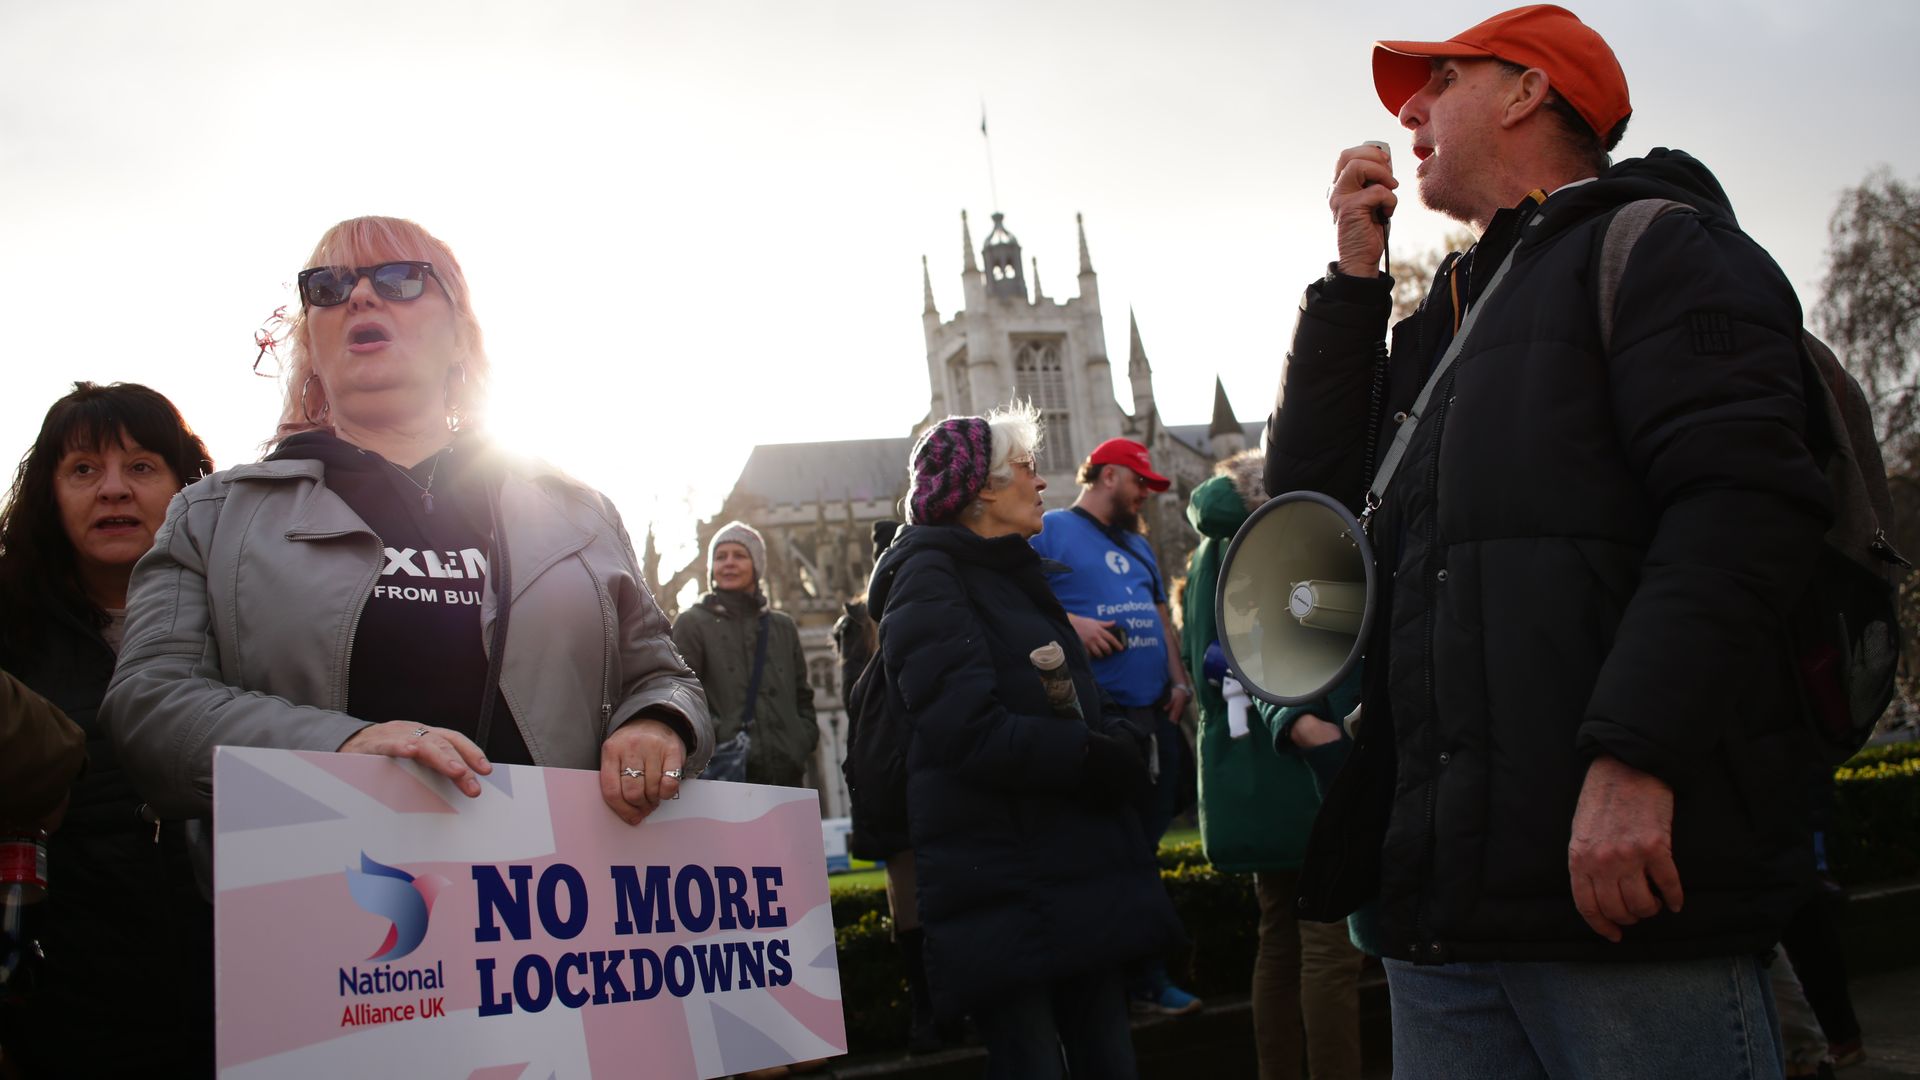 A woman holds a sign saying "no more lockdowns" next to a man in a red baseball cap 